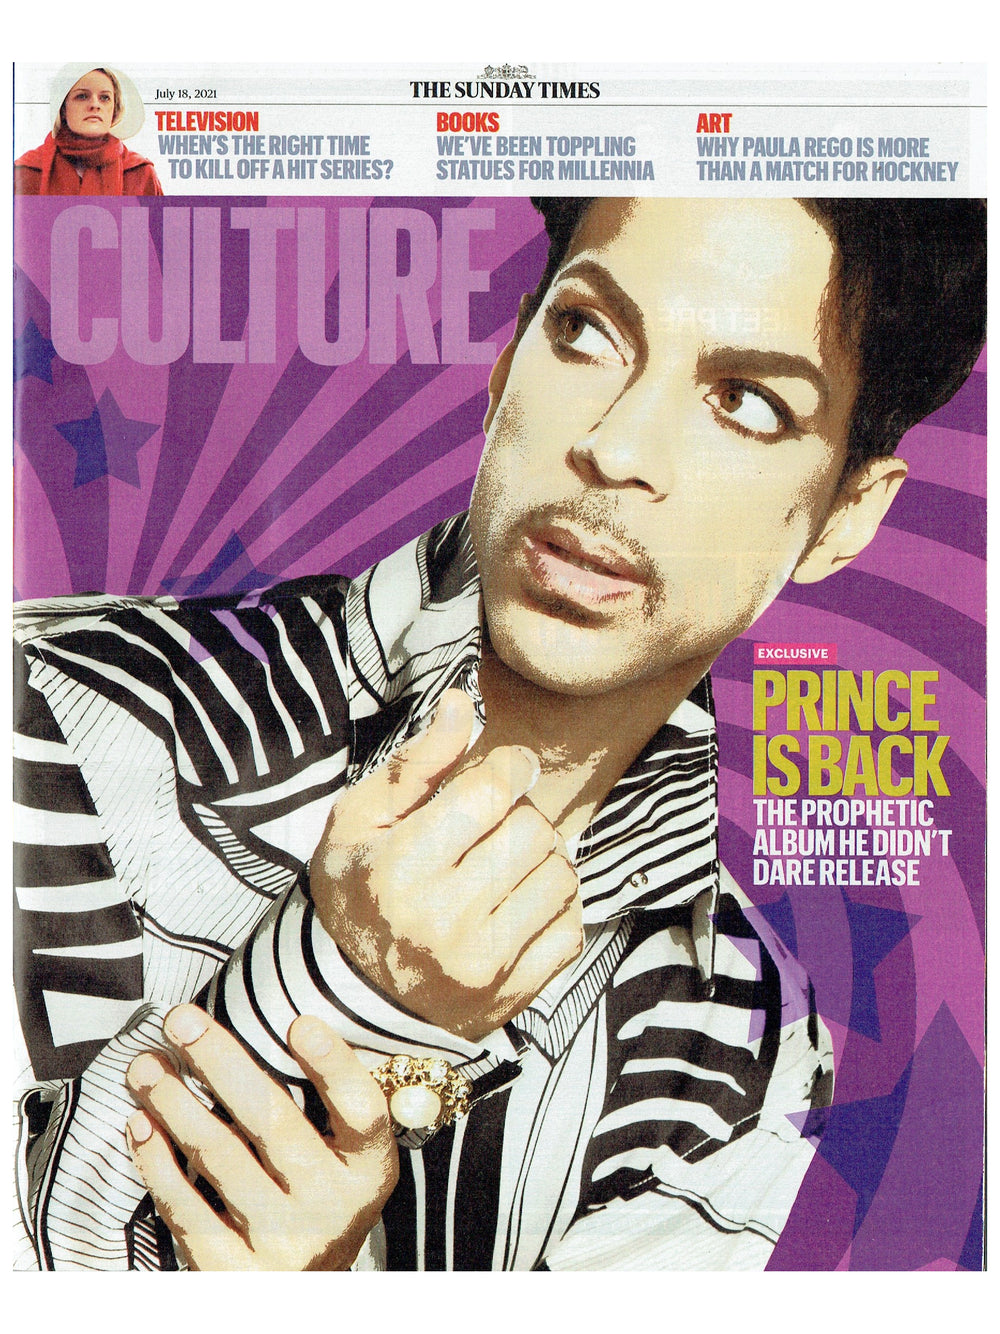 Prince The Sunday Times July 18th 2021 Prince Is Back Front Cover & 2 Page Article